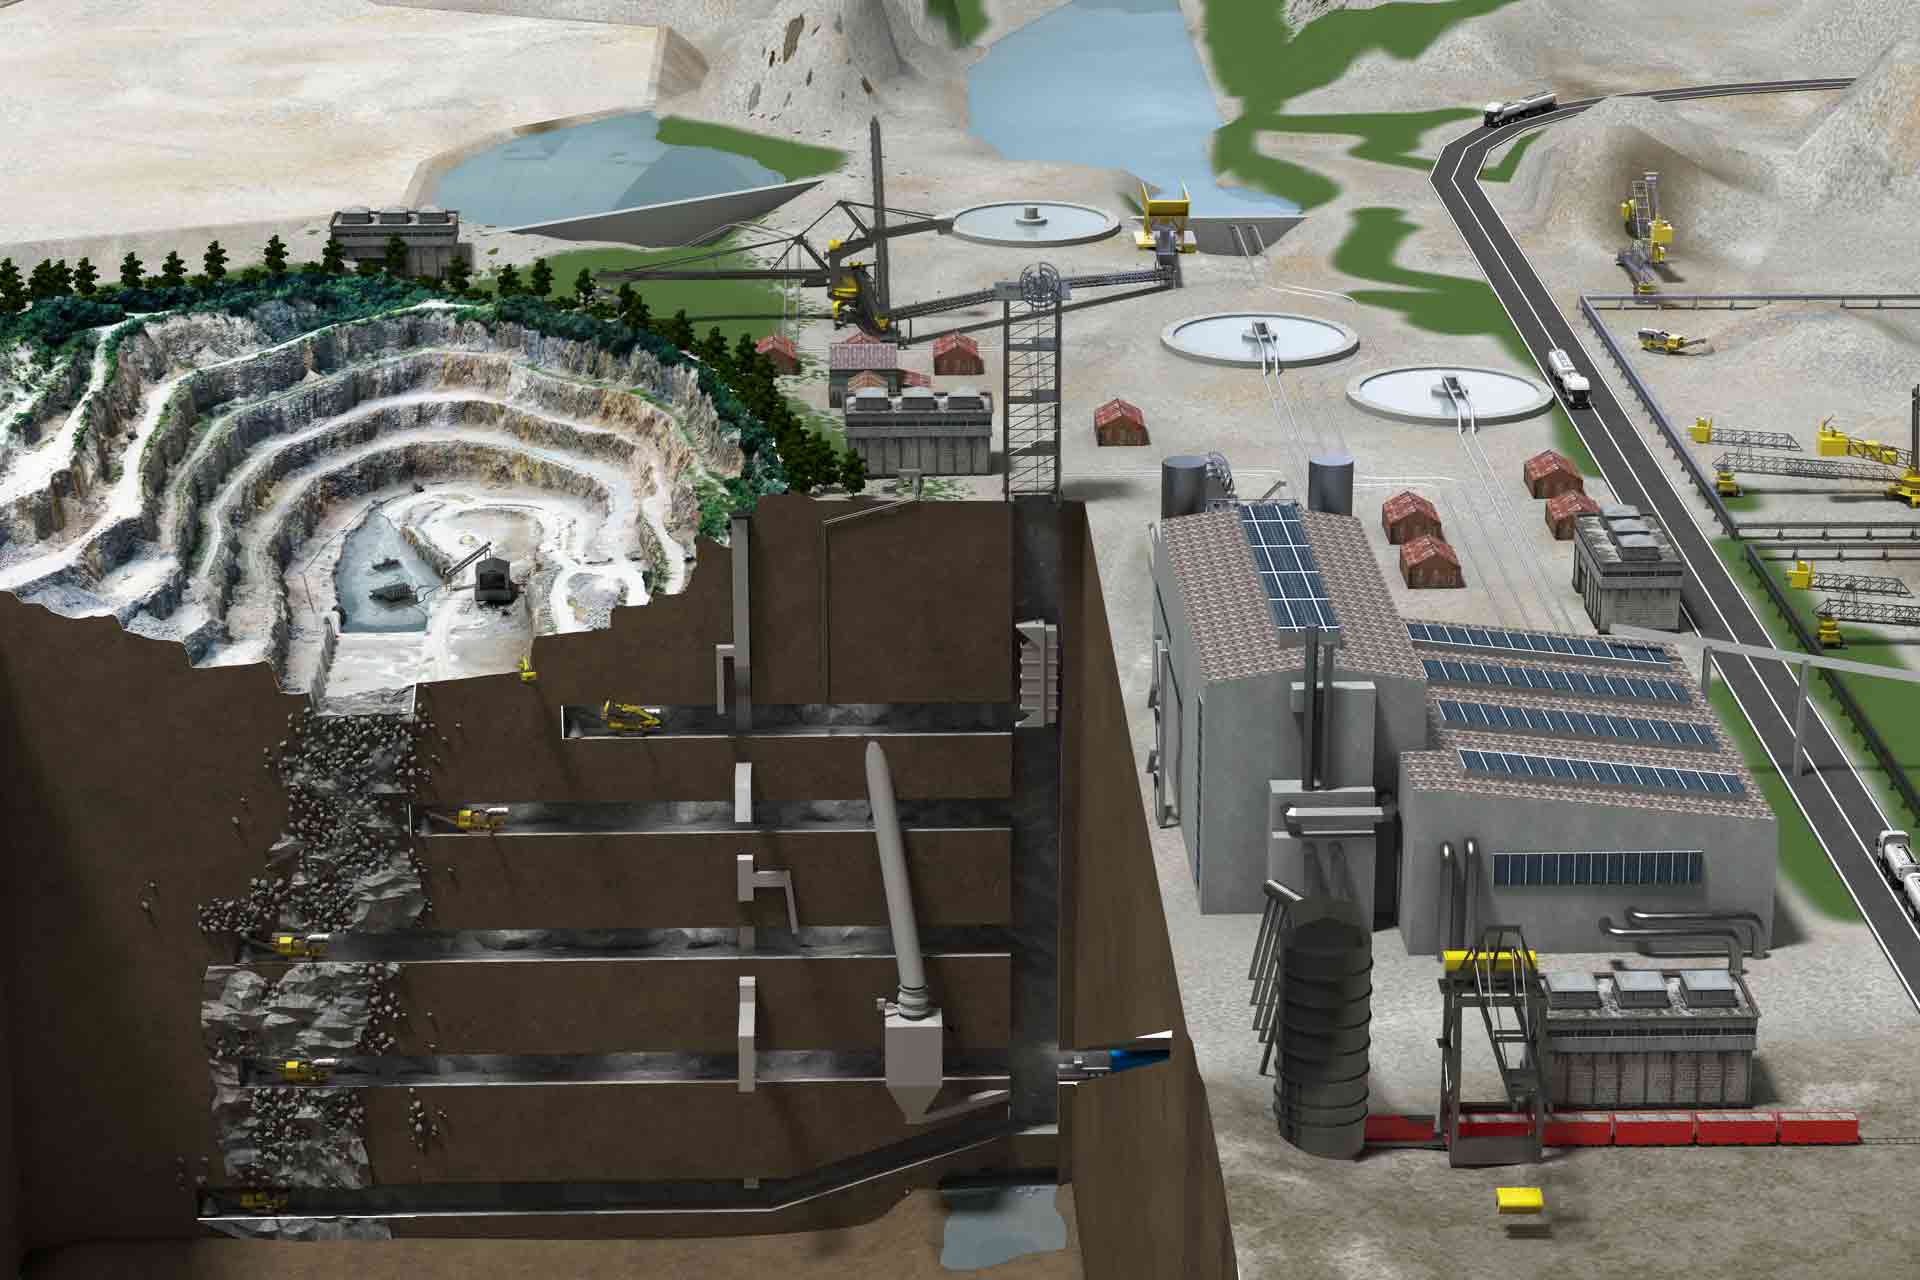 10 KW mining has an open-pit mine with 12 blocks of